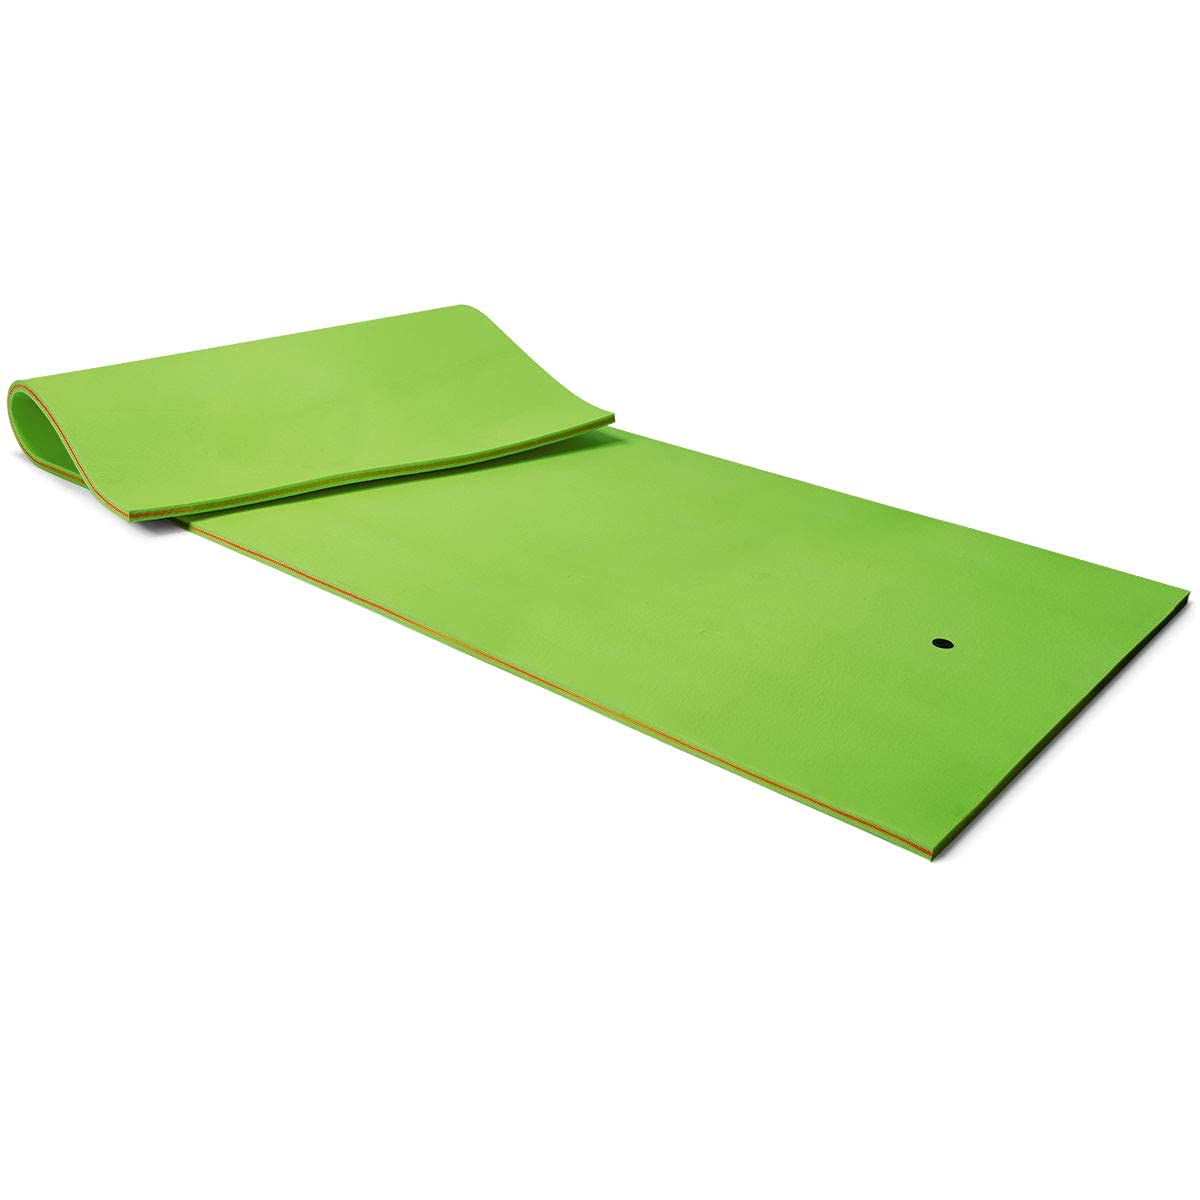 Details about   3-layer Tear-resistant Foam Floating Pad 